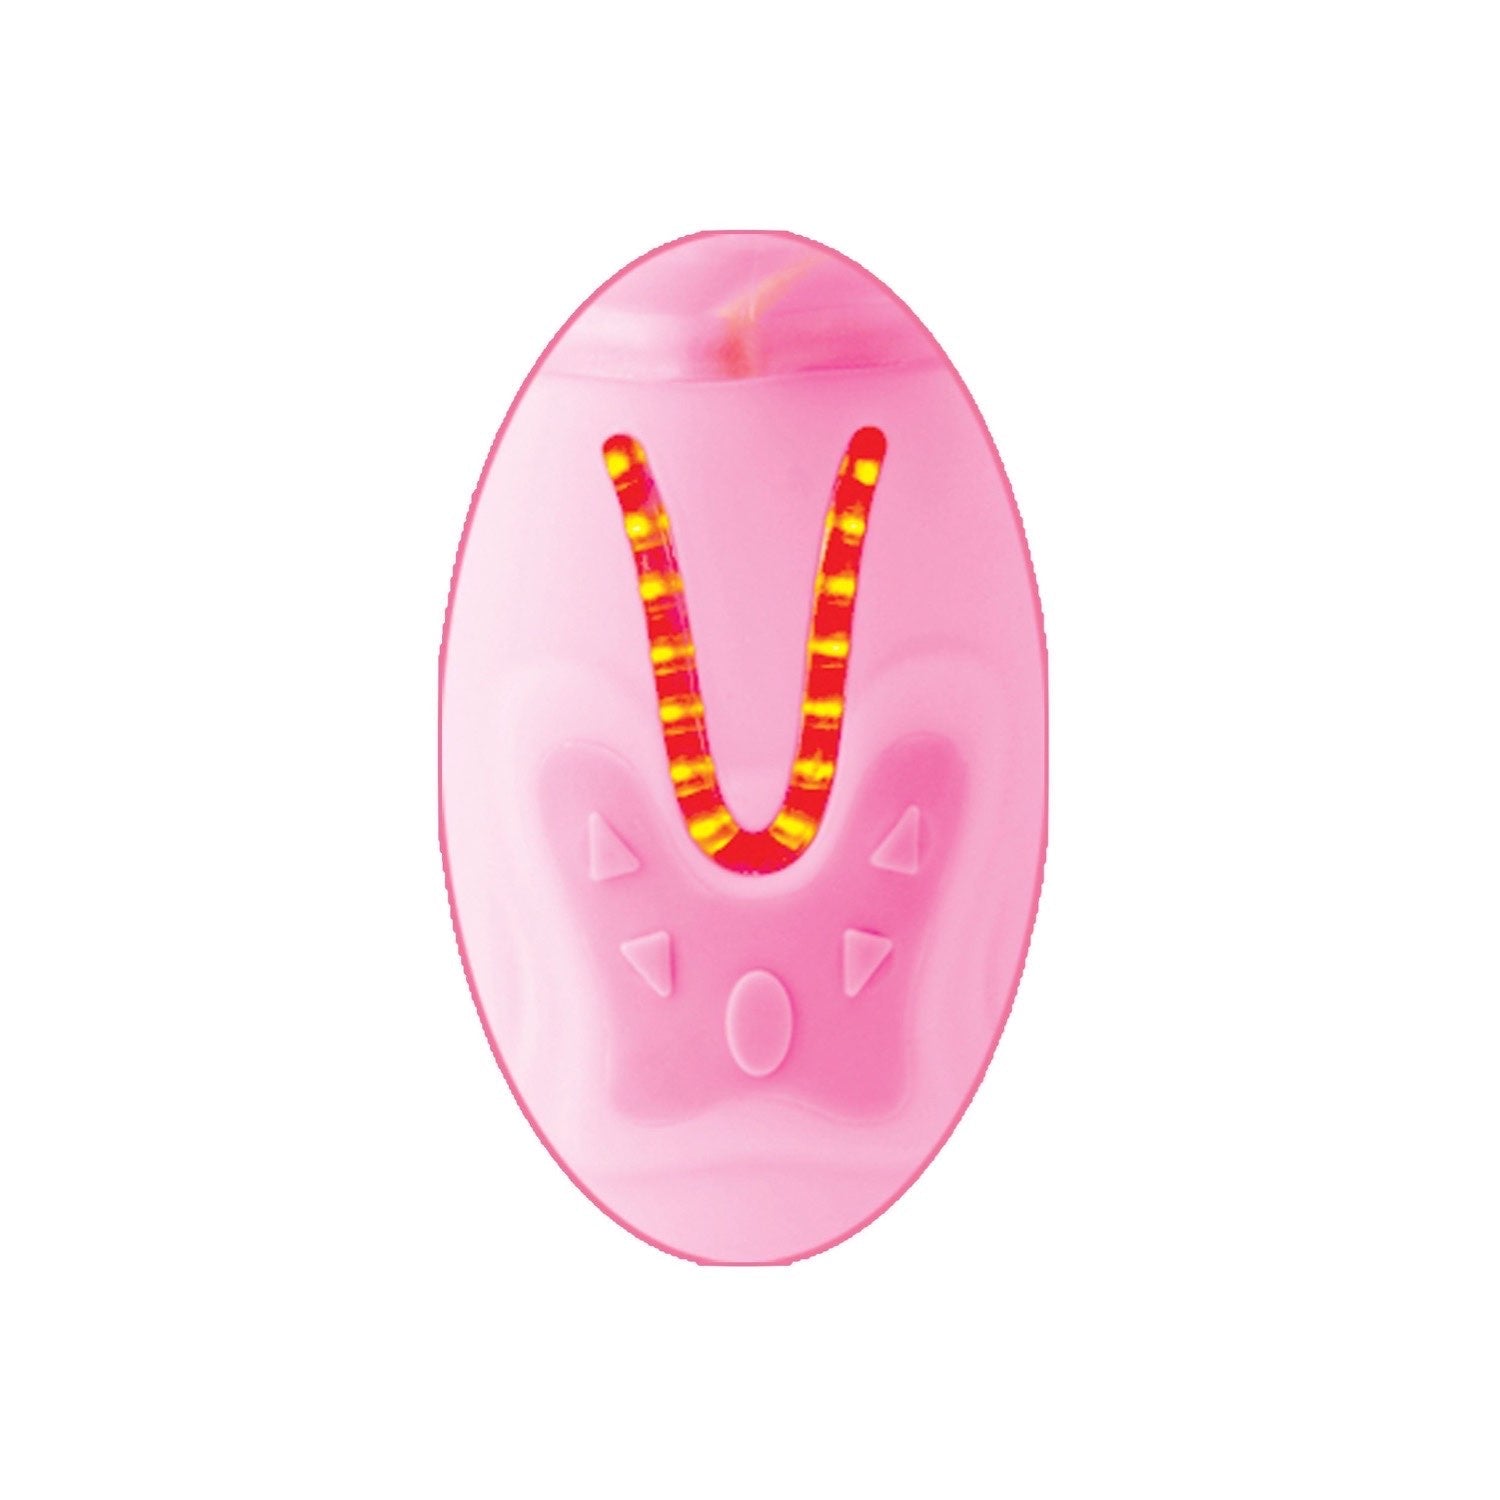  Remote Control Thrusting Rabbit Pearl - Pink 10.25&quot; Pearl Vibrator with Rabbit Clit Stimulator by Pipedream